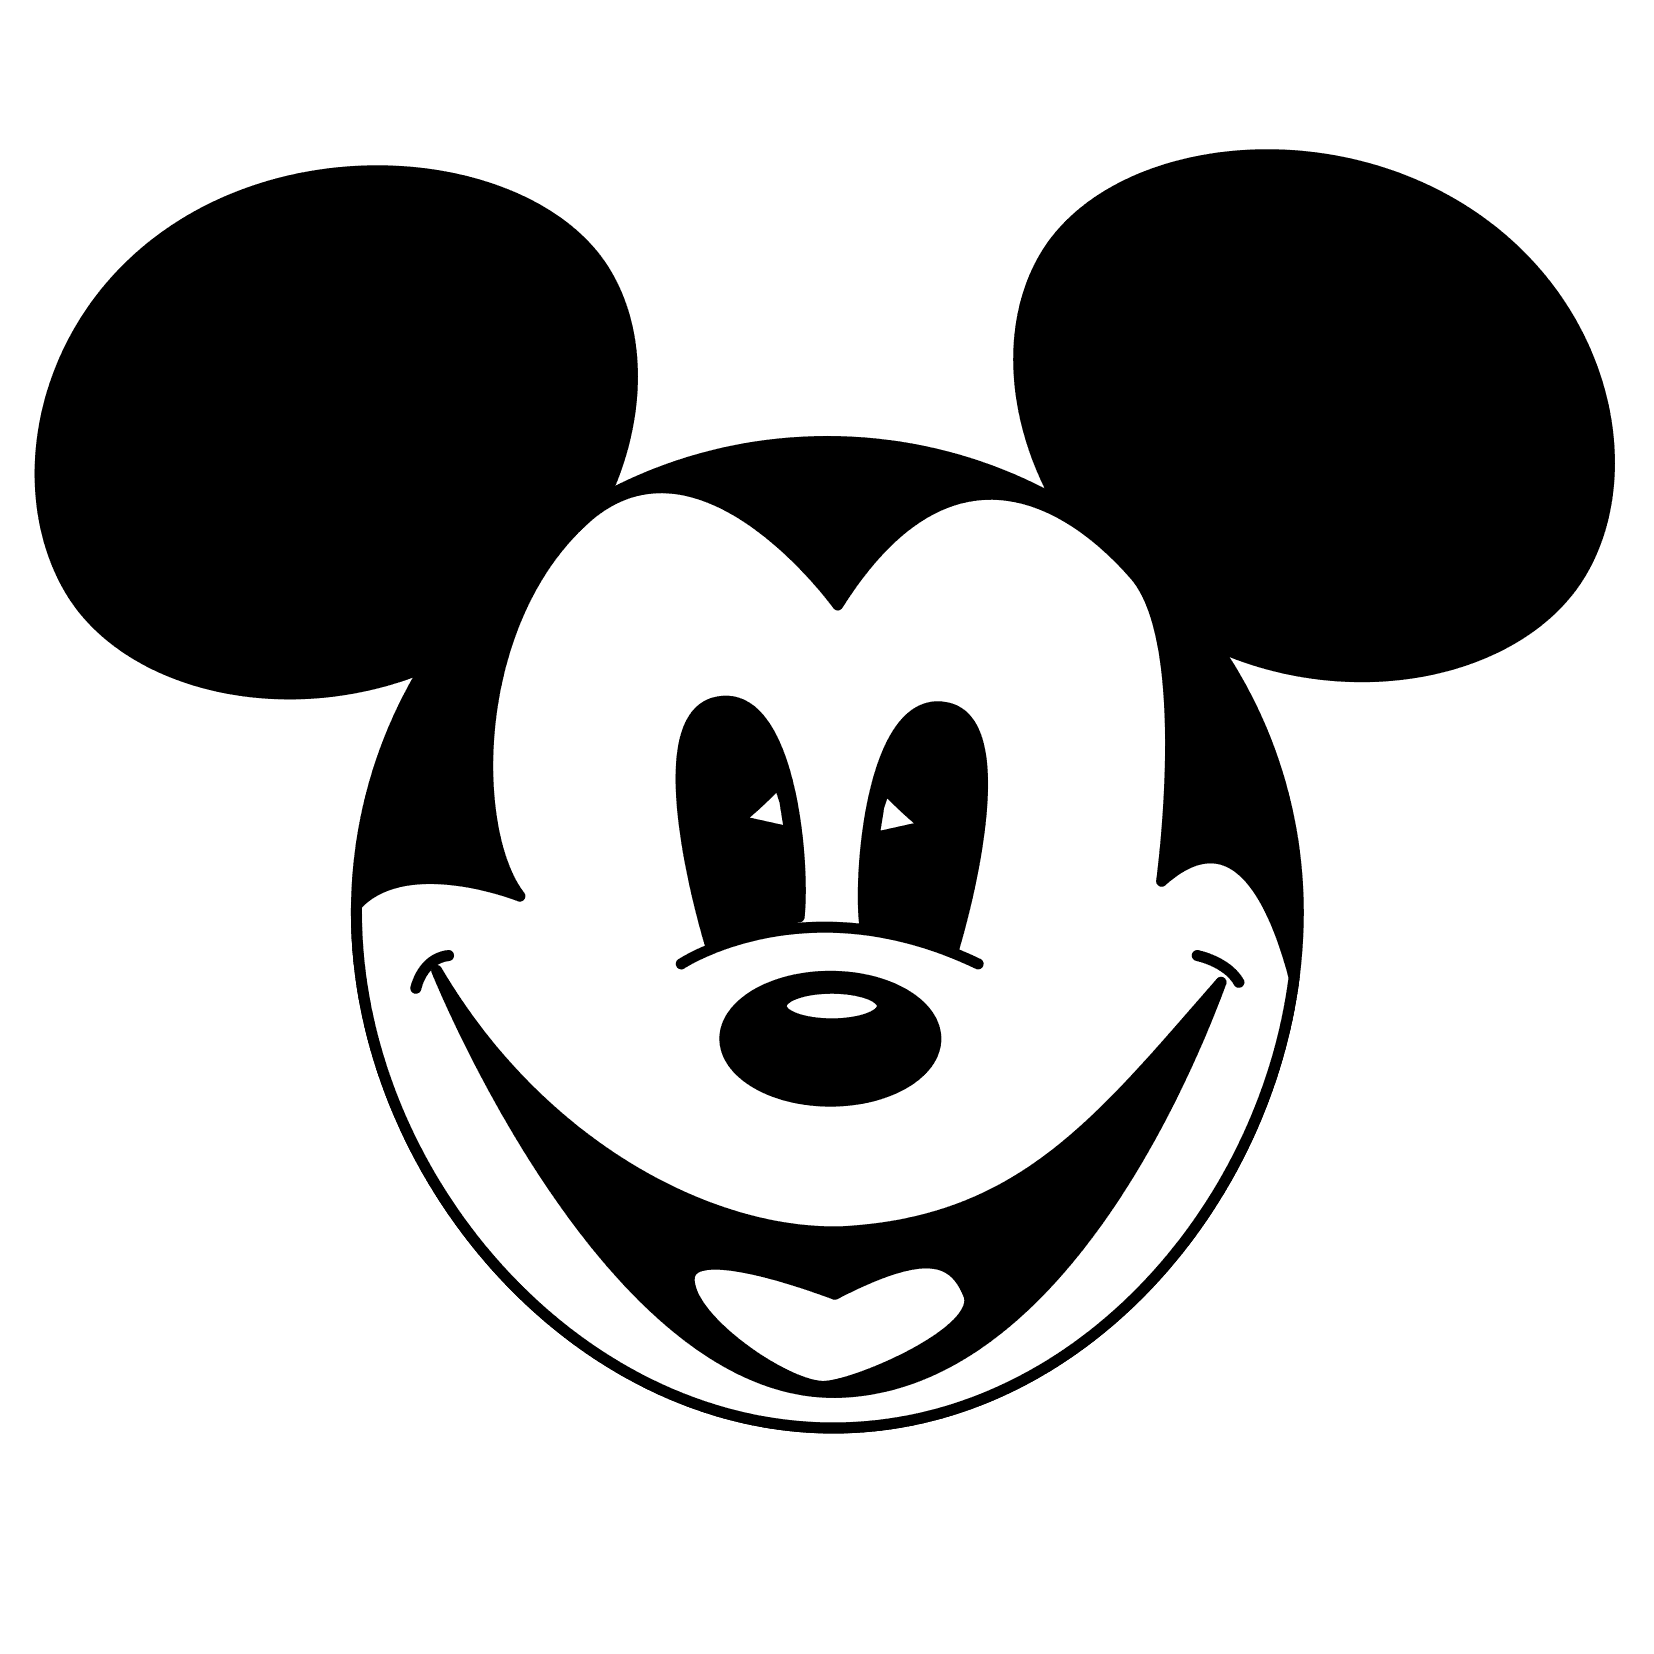 Mickey mouse head clipart | Clipart library - Free Clipart Images